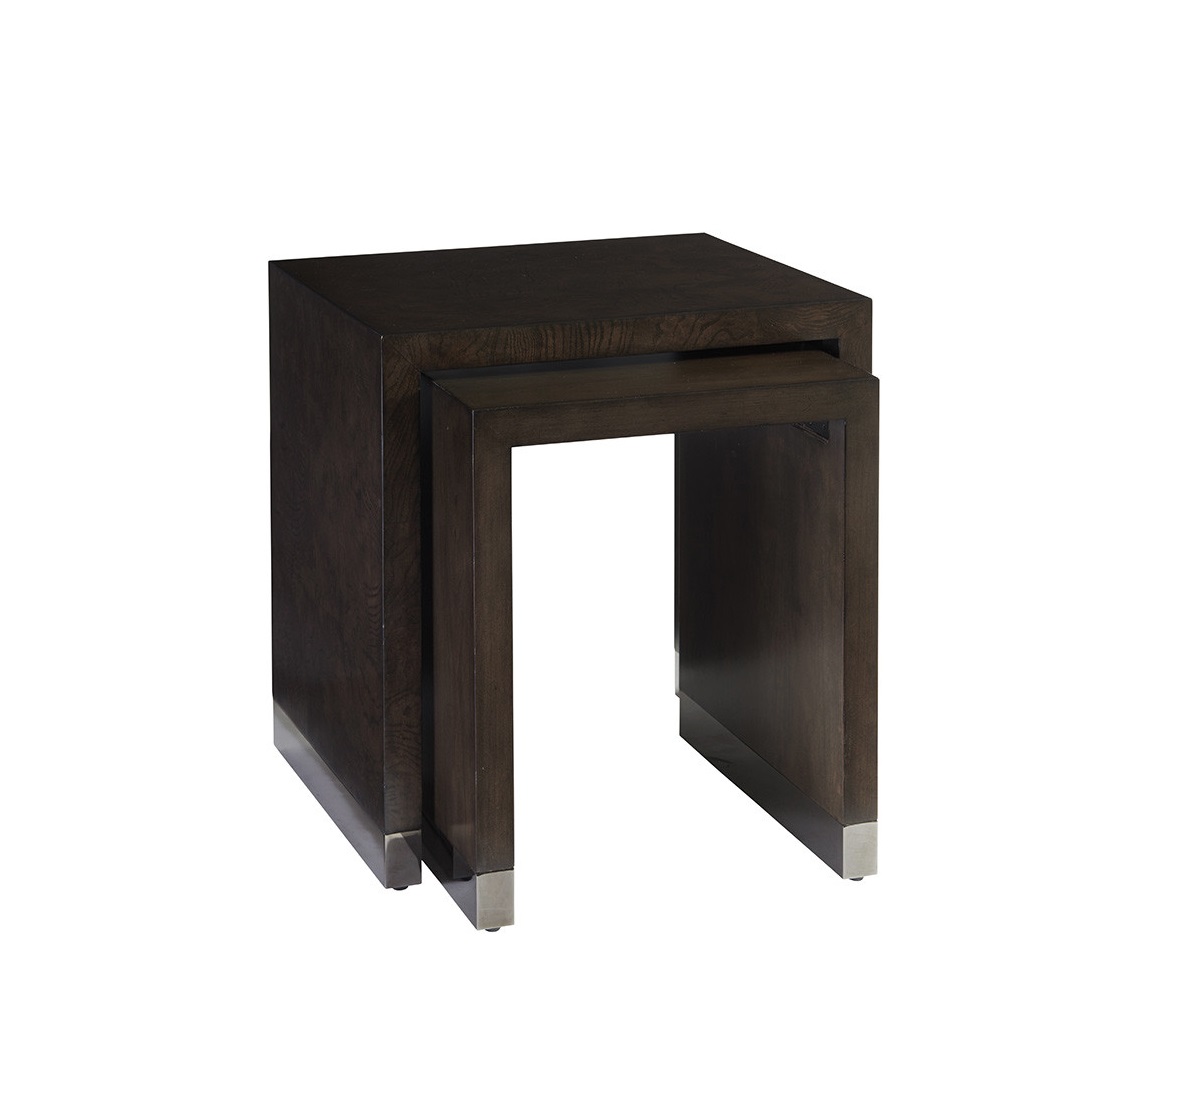 Deerbrook Nesting Tables, Lexington End Tables For Sale Cheap Brooklyn, New York, Furniture By ABD